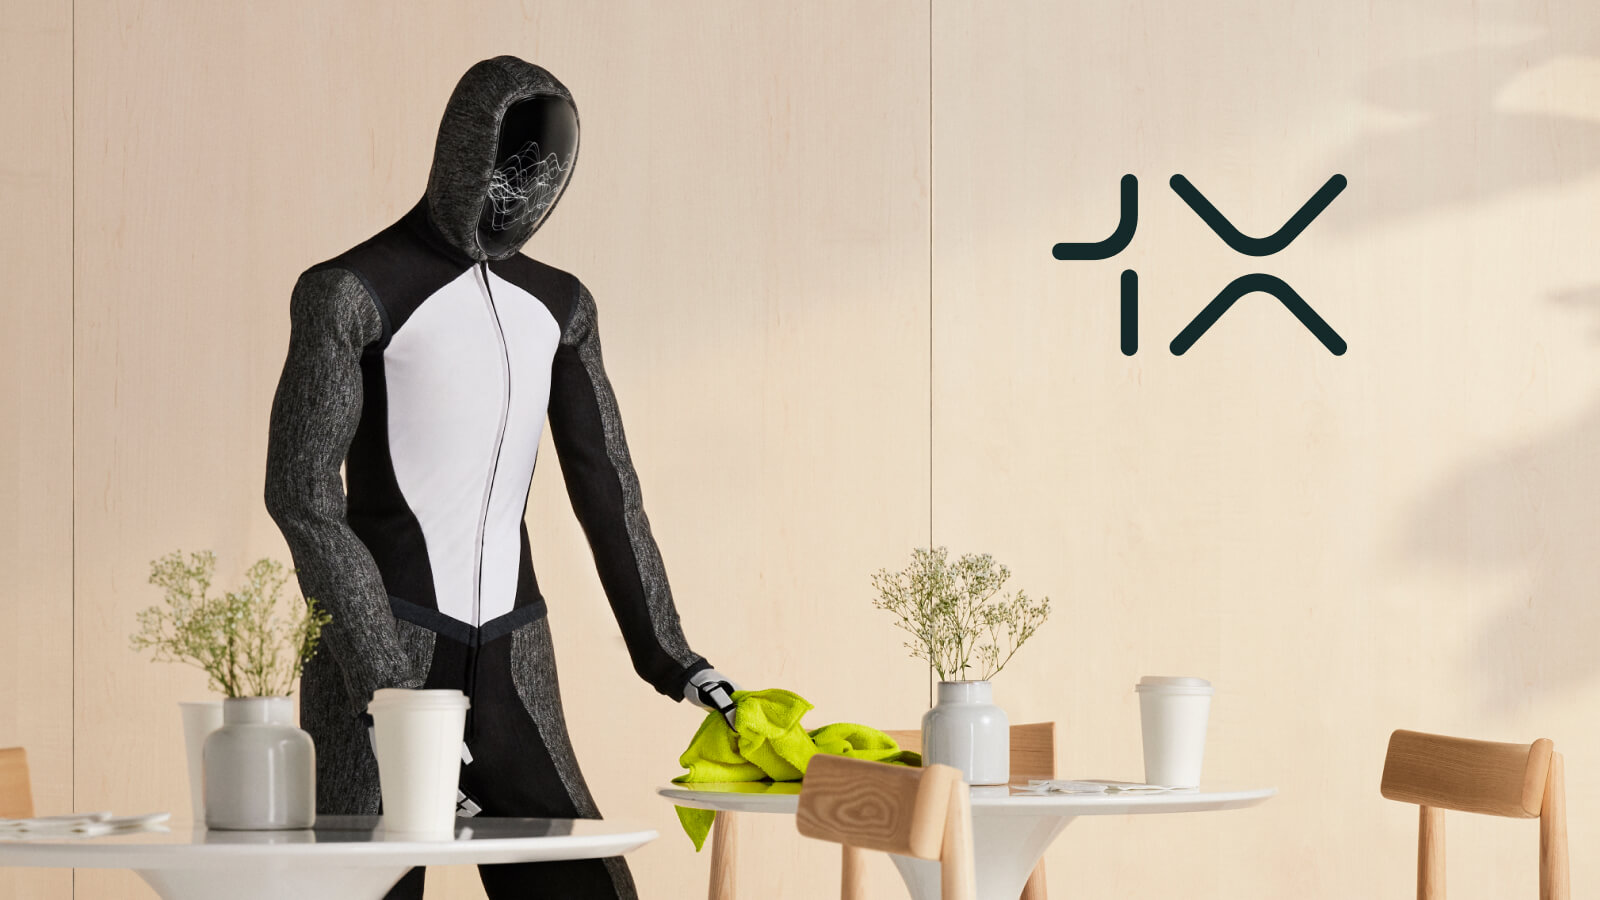 1X Secures $100M Funding For Advancing Humanoid Robots